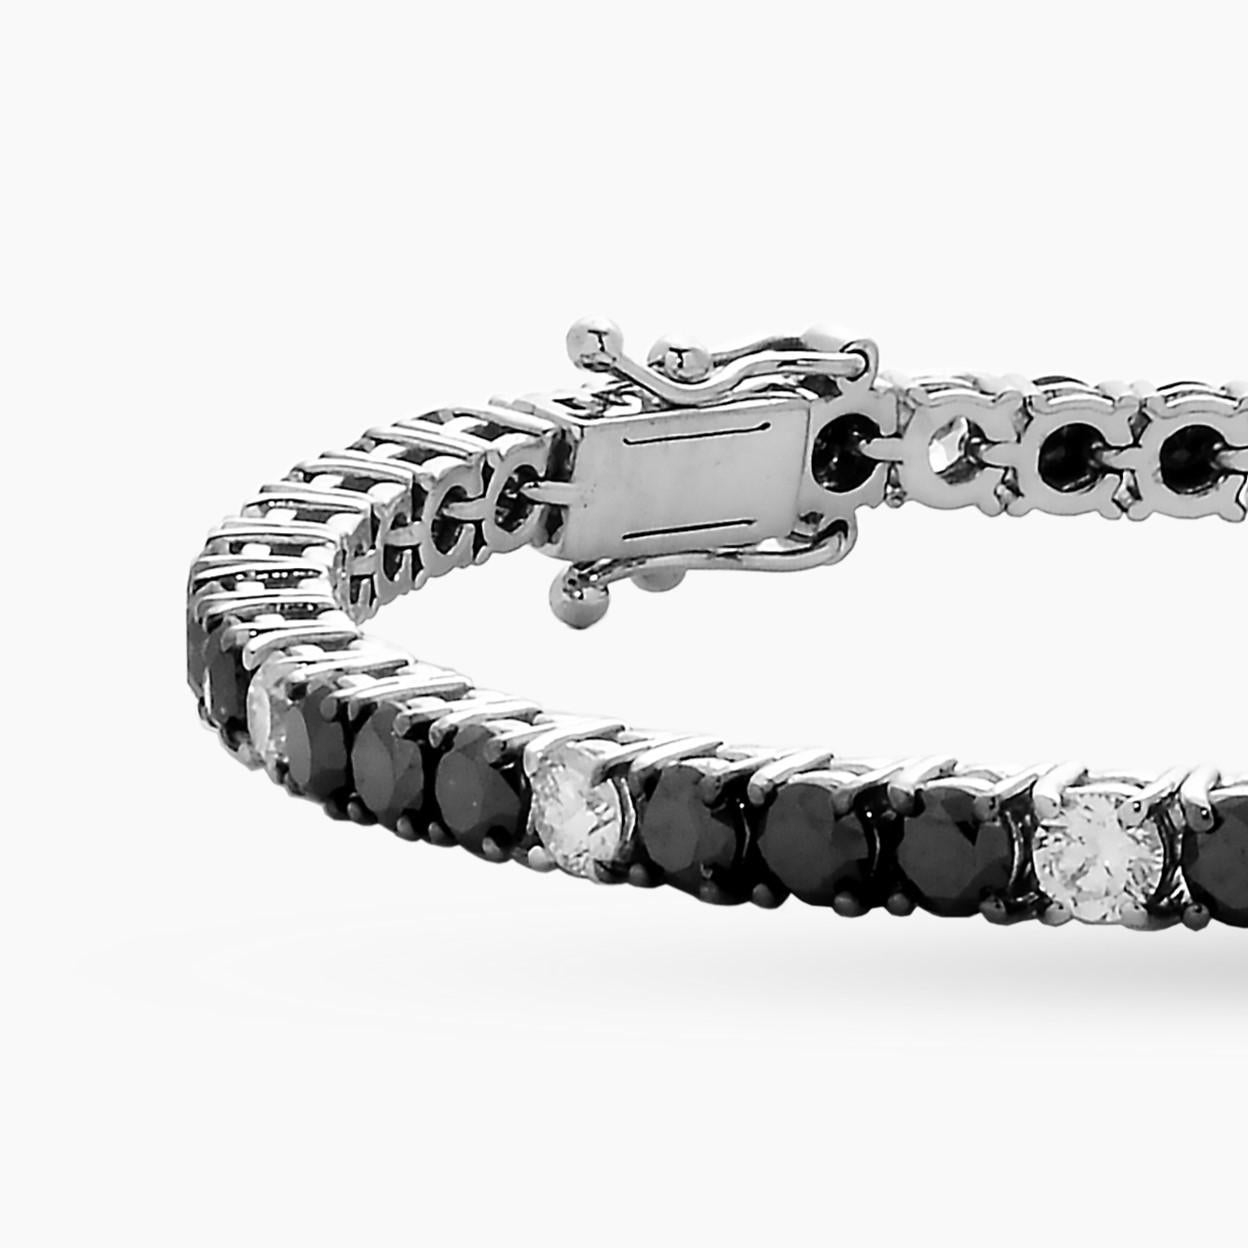 Beautiful unisex 18-karat white gold tennis bracelet with a total carat of 5.99 carat mixed set with brilliant cut black diamonds and brilliant cut natural white diamonds: color F/G, clarity V-S quality. 

This is a no turn riviera bracelet and has